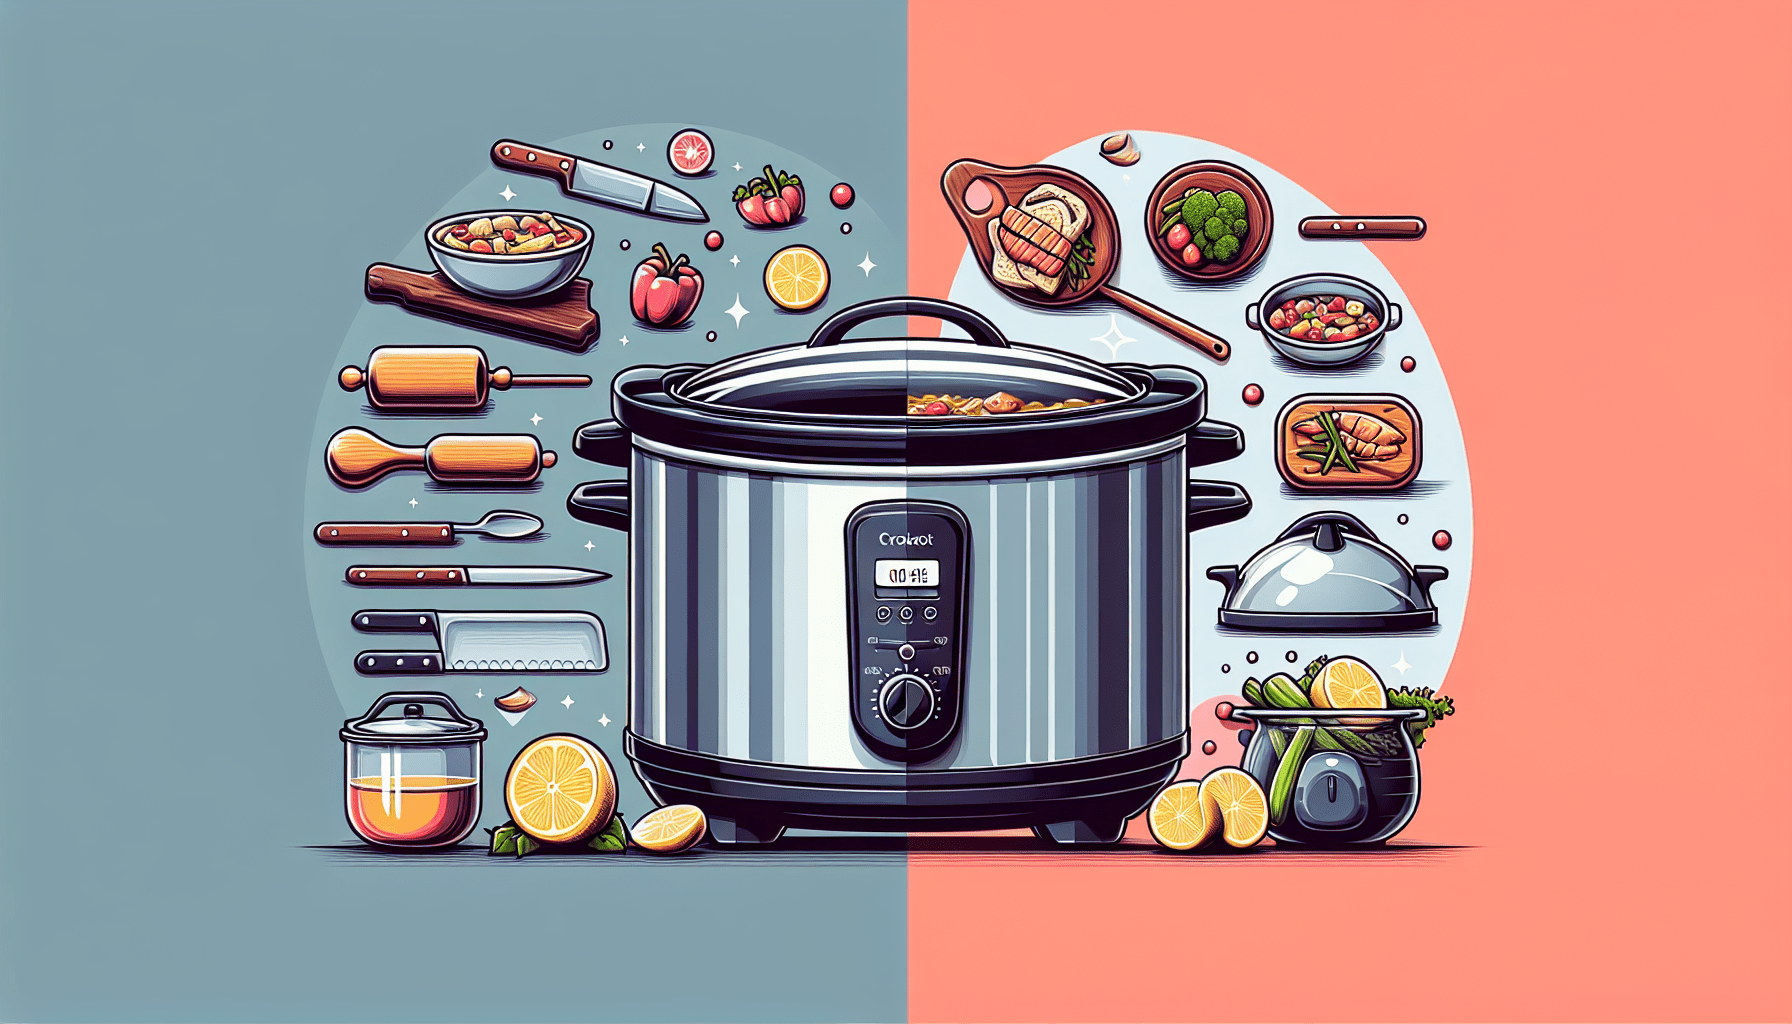 What Is Difference Between Crockpot And Slow Cooker?